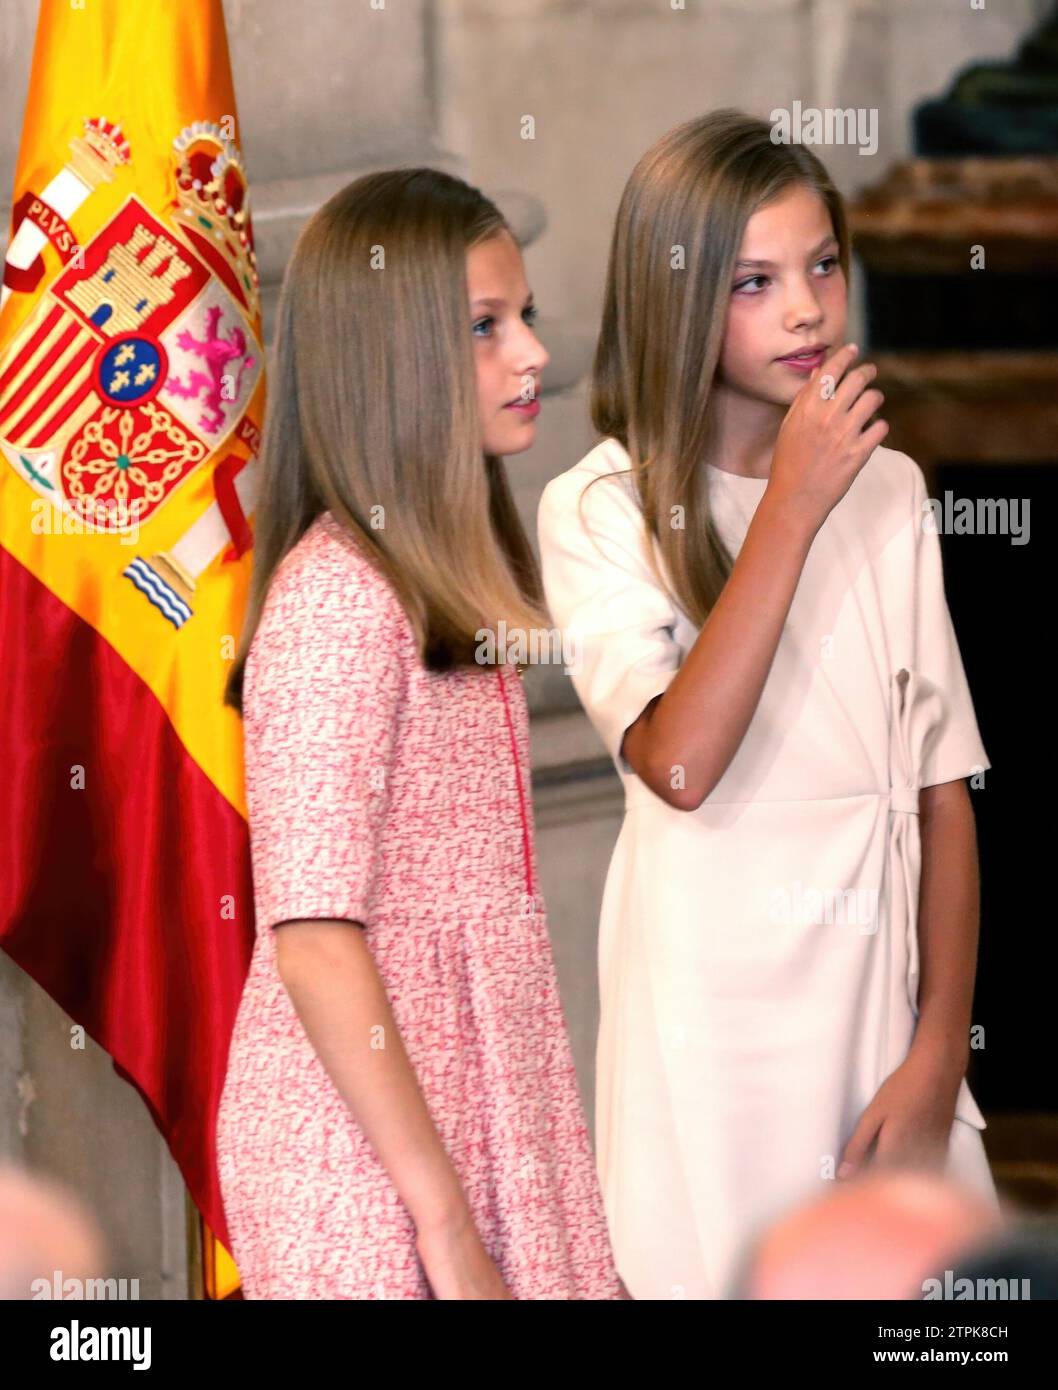 Madrid, 06/19/2019. SS.MM. King Felipe and Queen Letizia, accompanied by Princess Leonor and Infanta Sofía, during the awarding of the medals for civil merit at the Royal Palace. Photo: Ernesto Agudo ARCHDC. Credit: Album / Archivo ABC / Ernesto Agudo Stock Photo